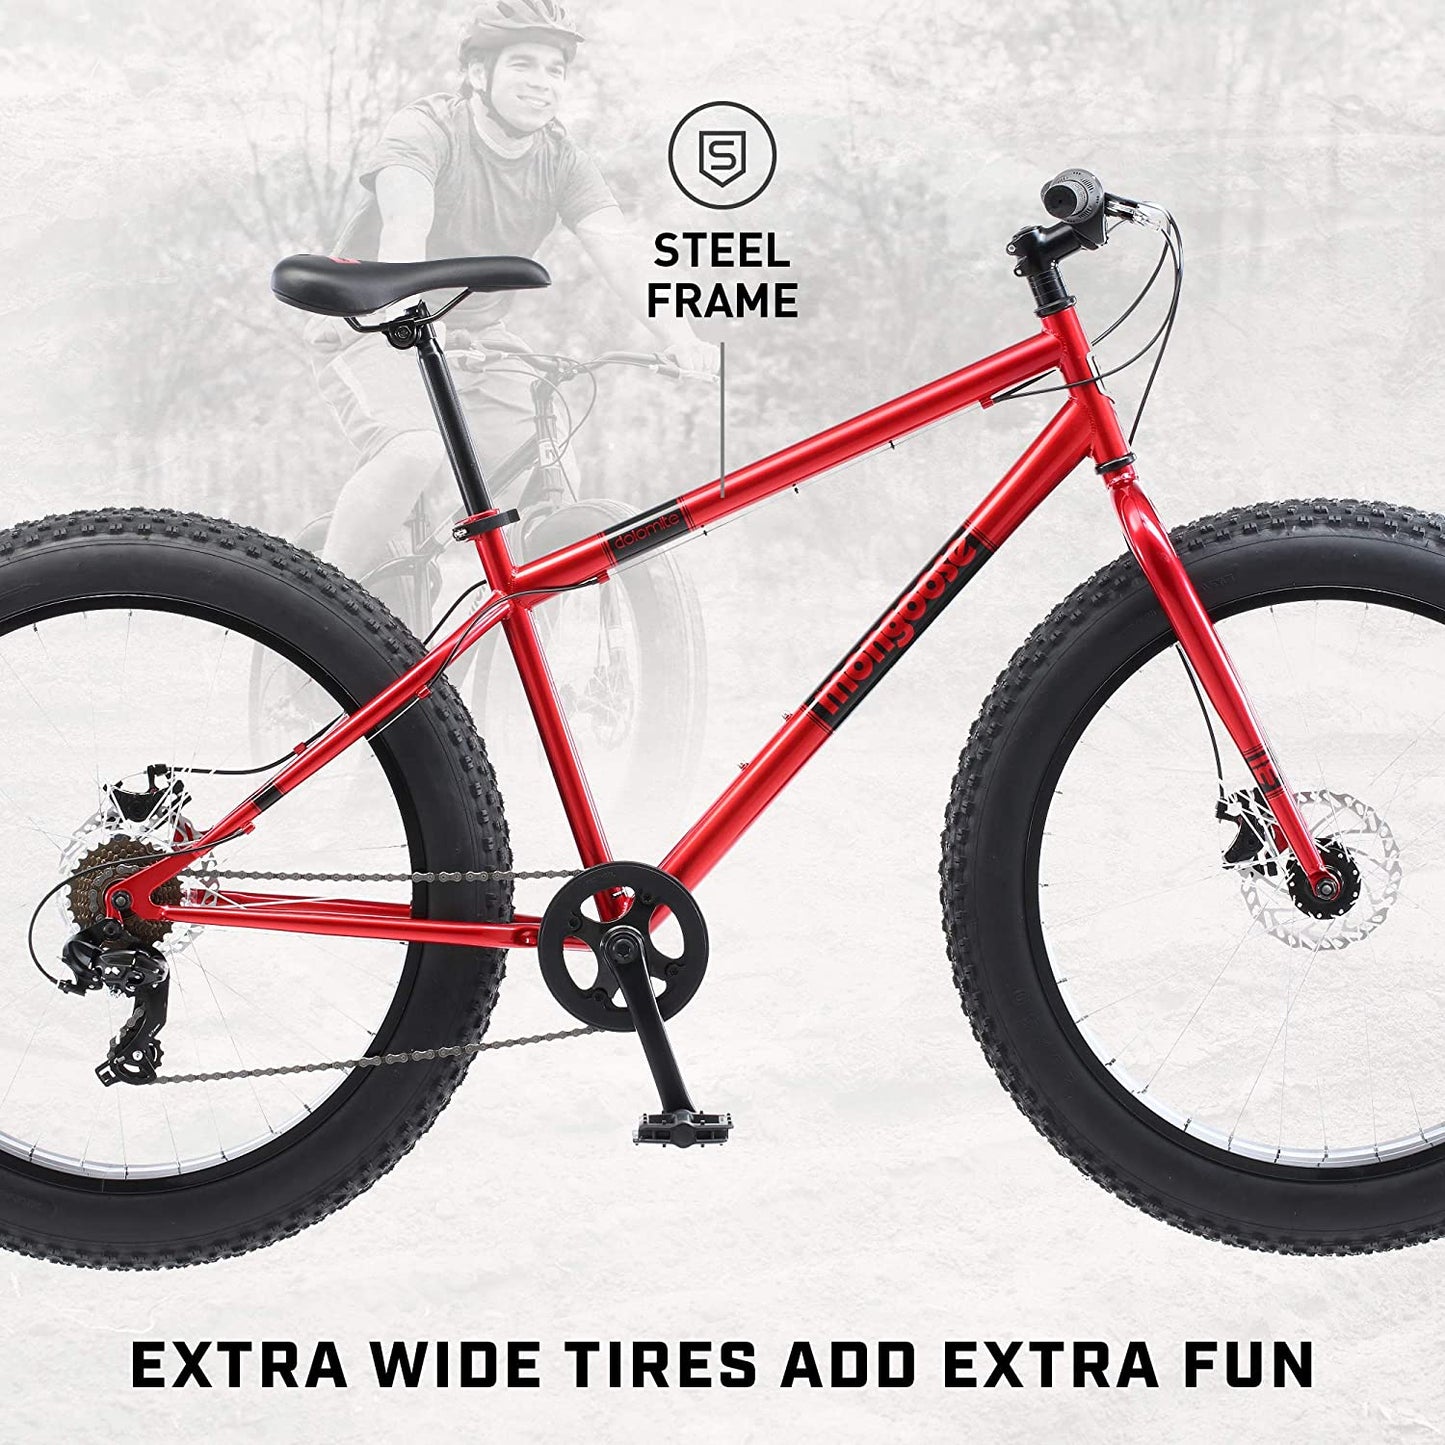 Mongoose Dolomite Mens Adult Fat Tire Mountain Bike, 7-Speed, 26-Inch Wheels, 4-Inch Wide Tires